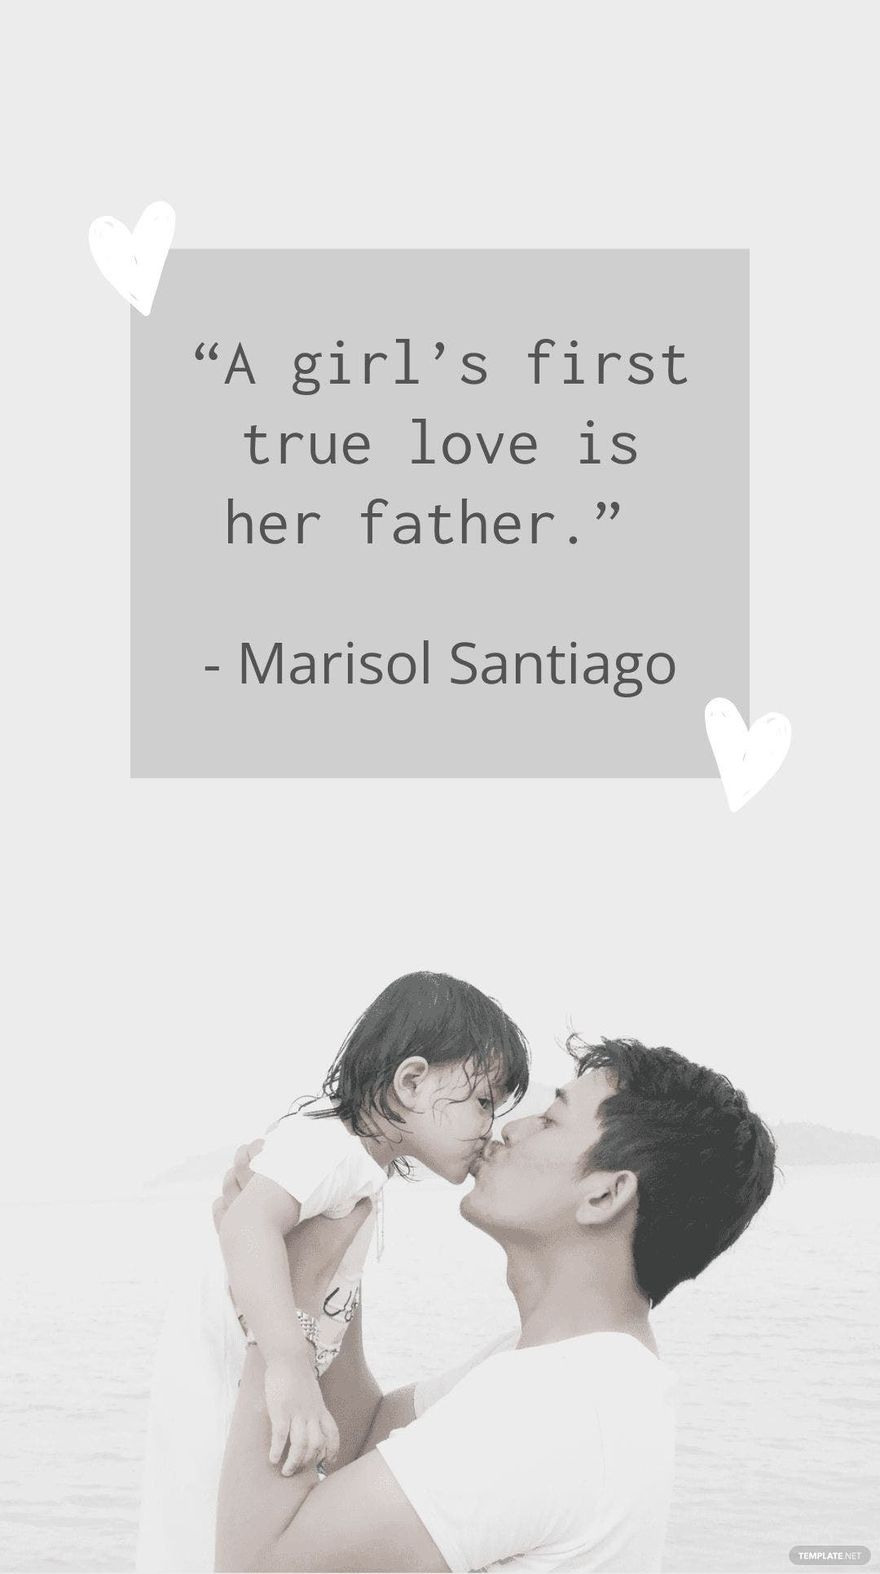 Marisol Santiago  - “A girl’s first true love is her father.”